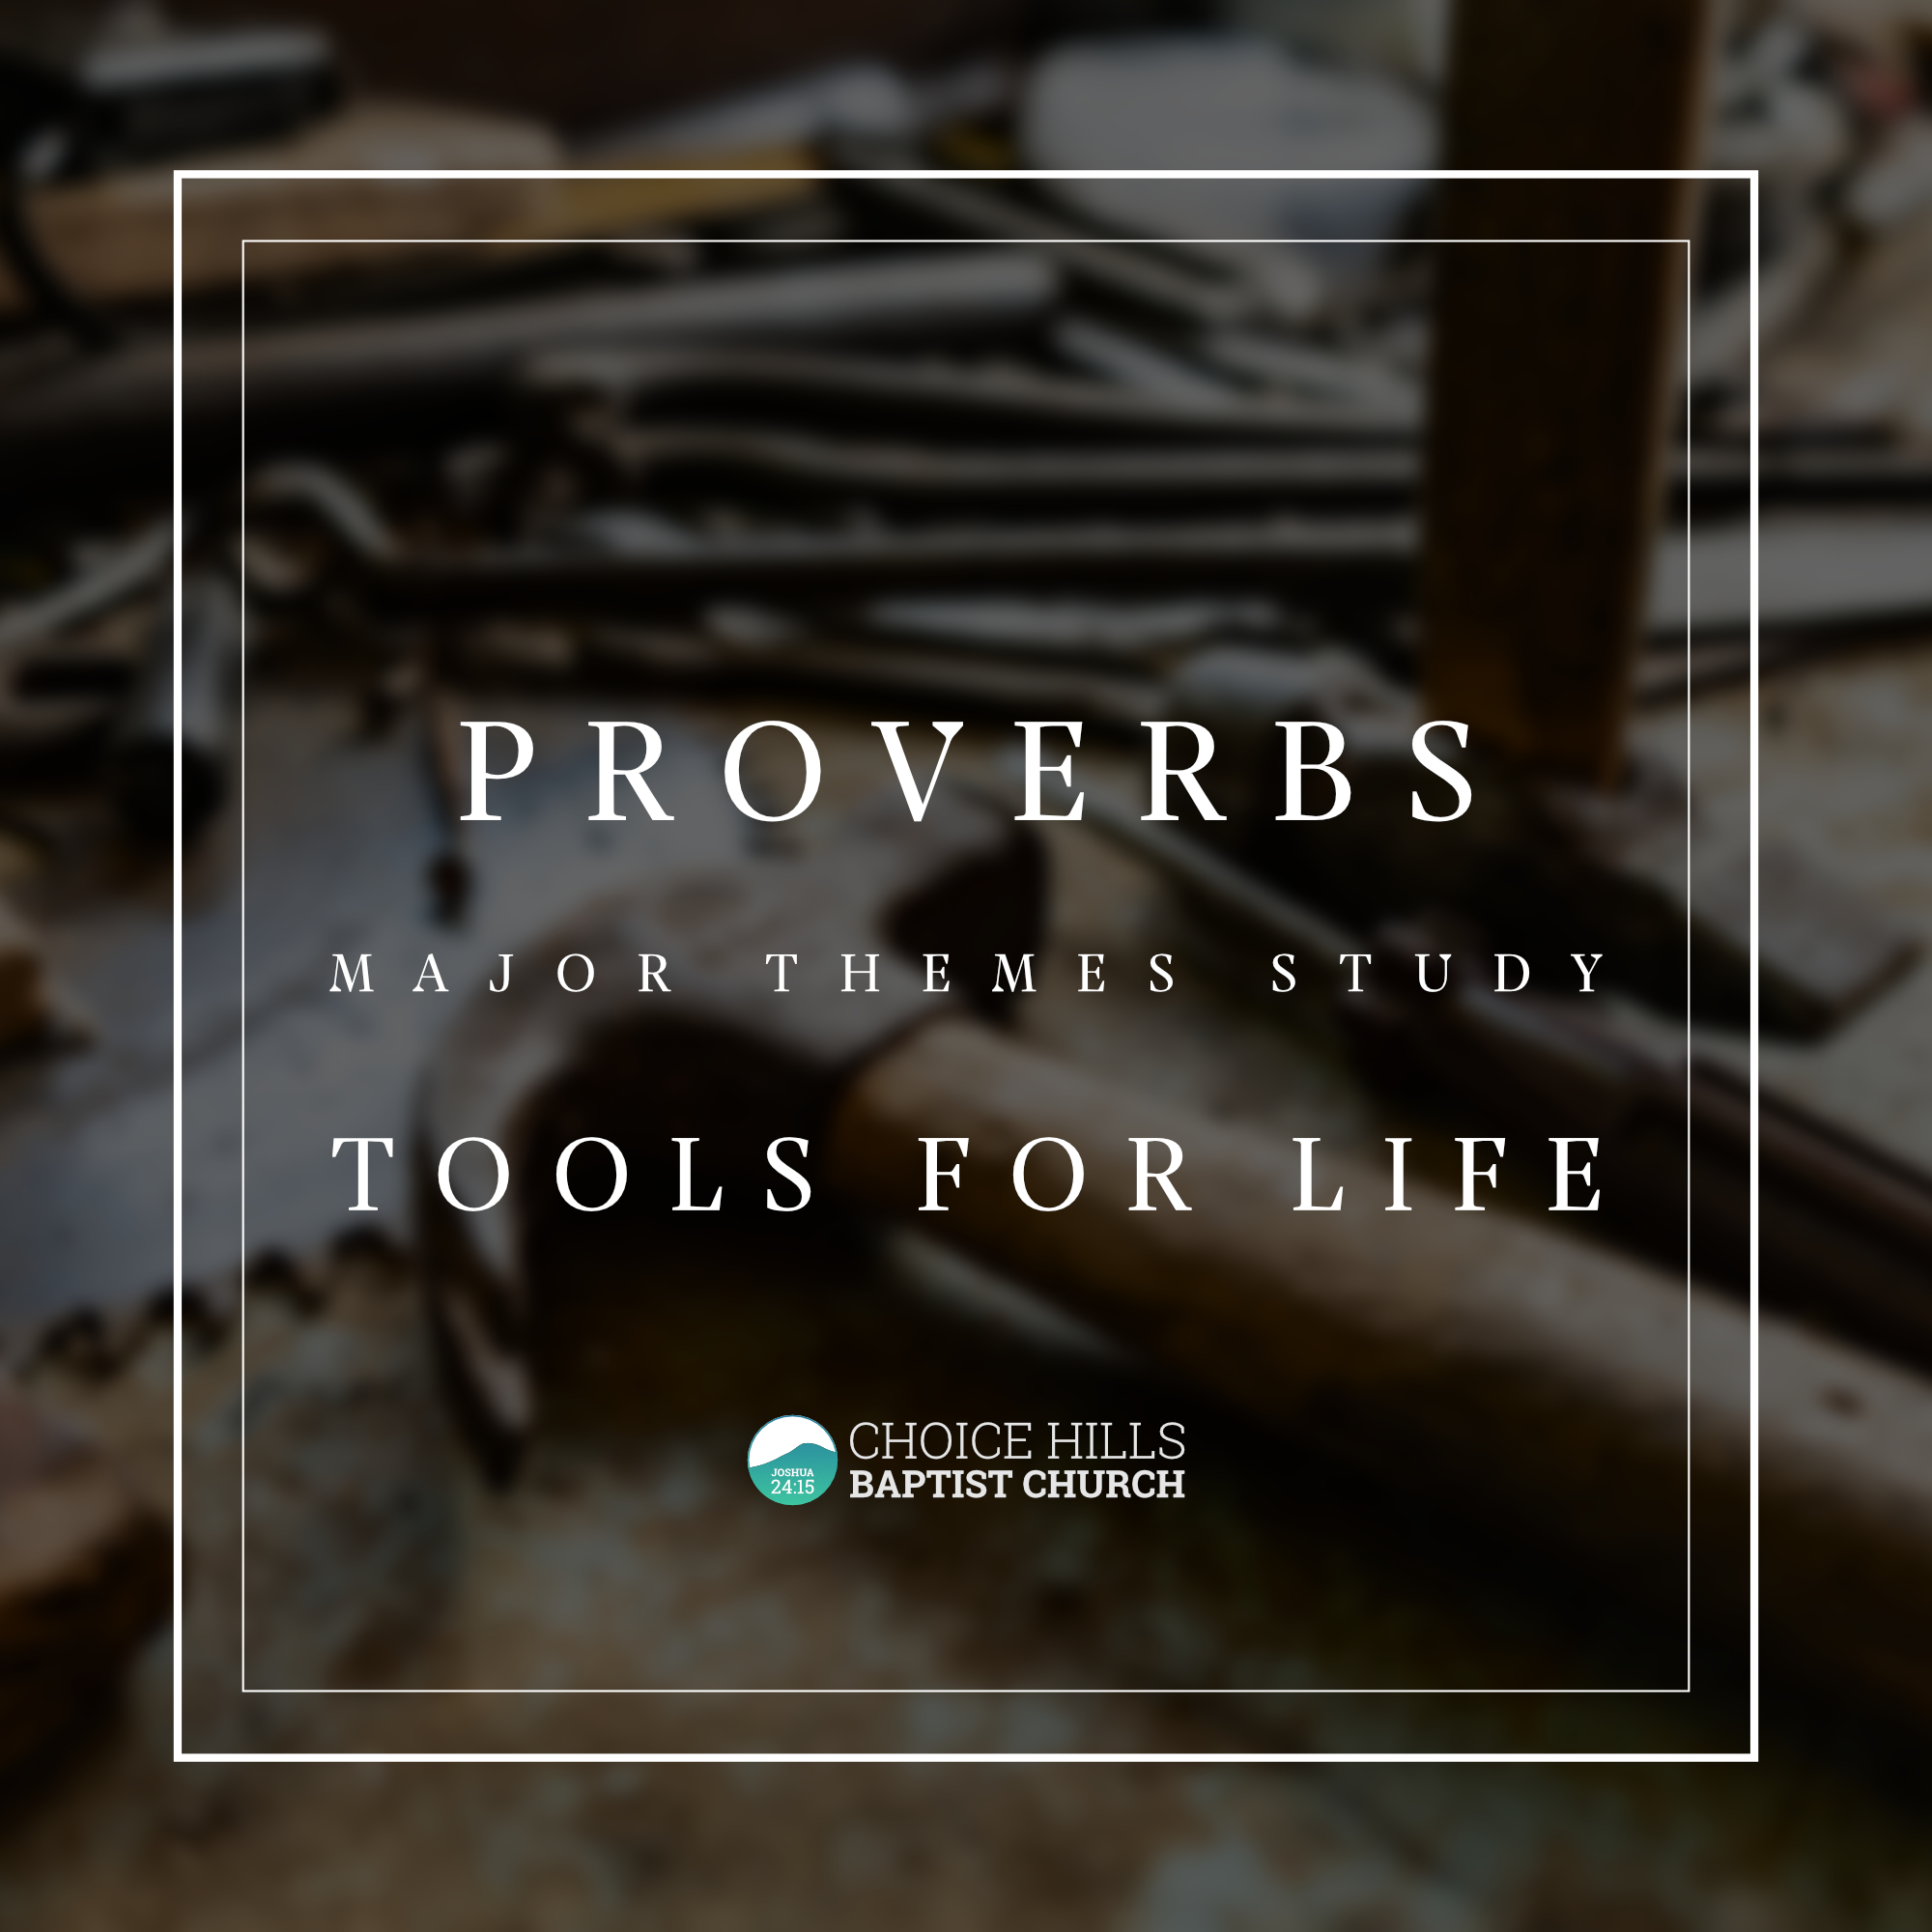 Adult Sunday School: Proverbs—Tools for Life: The Fear of the Lord (Part 1)